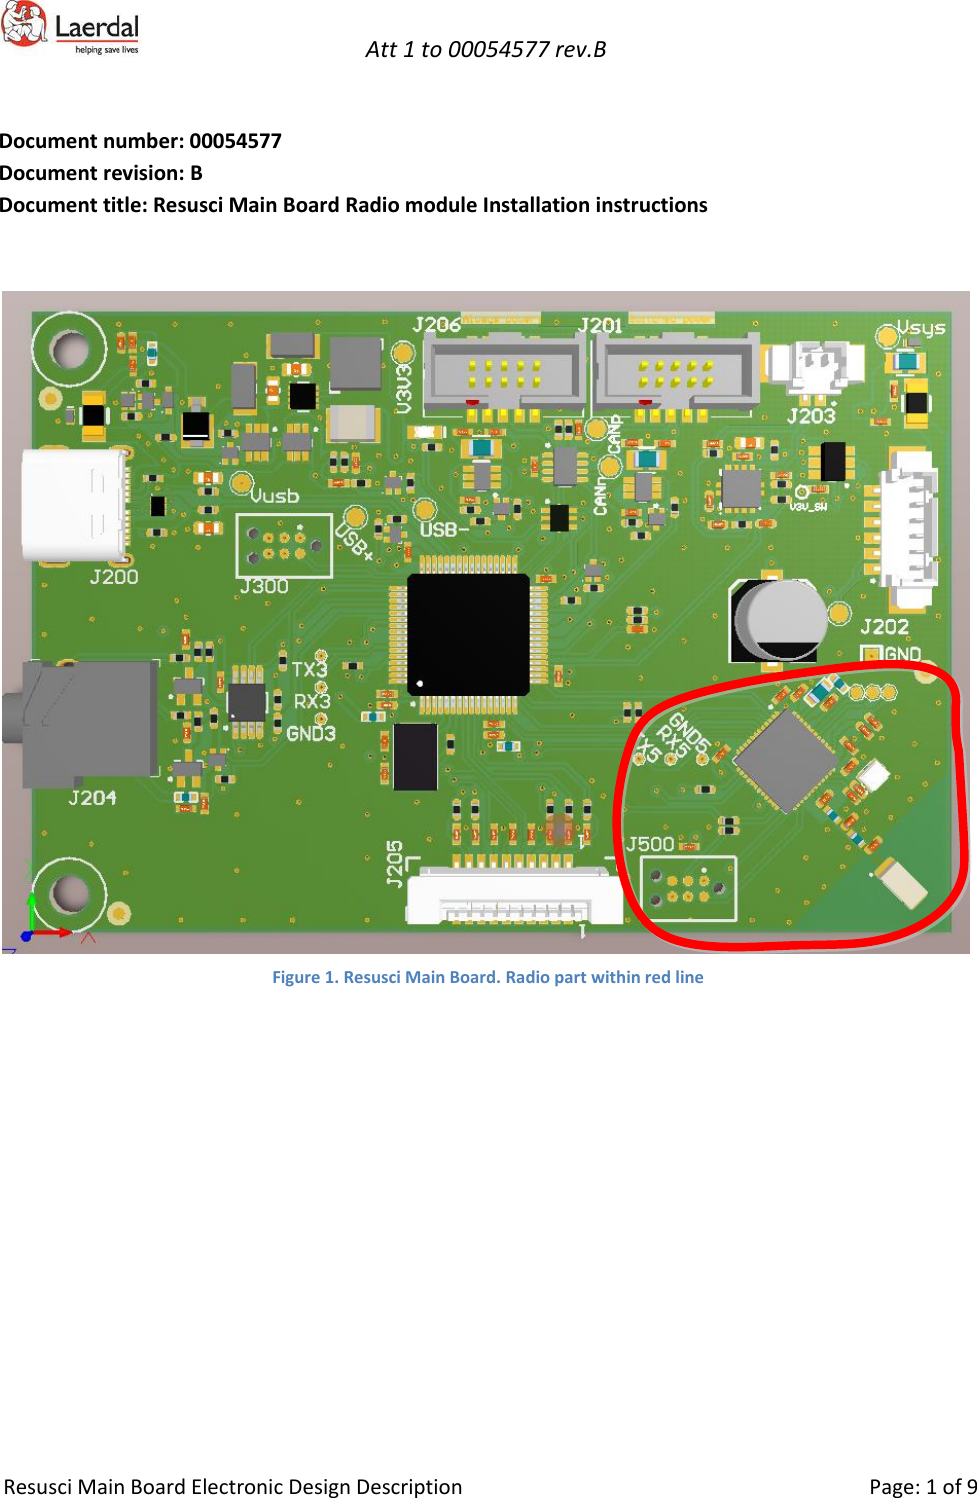   Att 1 to 00054577 rev.B     Resusci Main Board Electronic Design Description     Page: 1 of 9  Document number: 00054577 Document revision: B Document title: Resusci Main Board Radio module Installation instructions    Figure 1. Resusci Main Board. Radio part within red line    